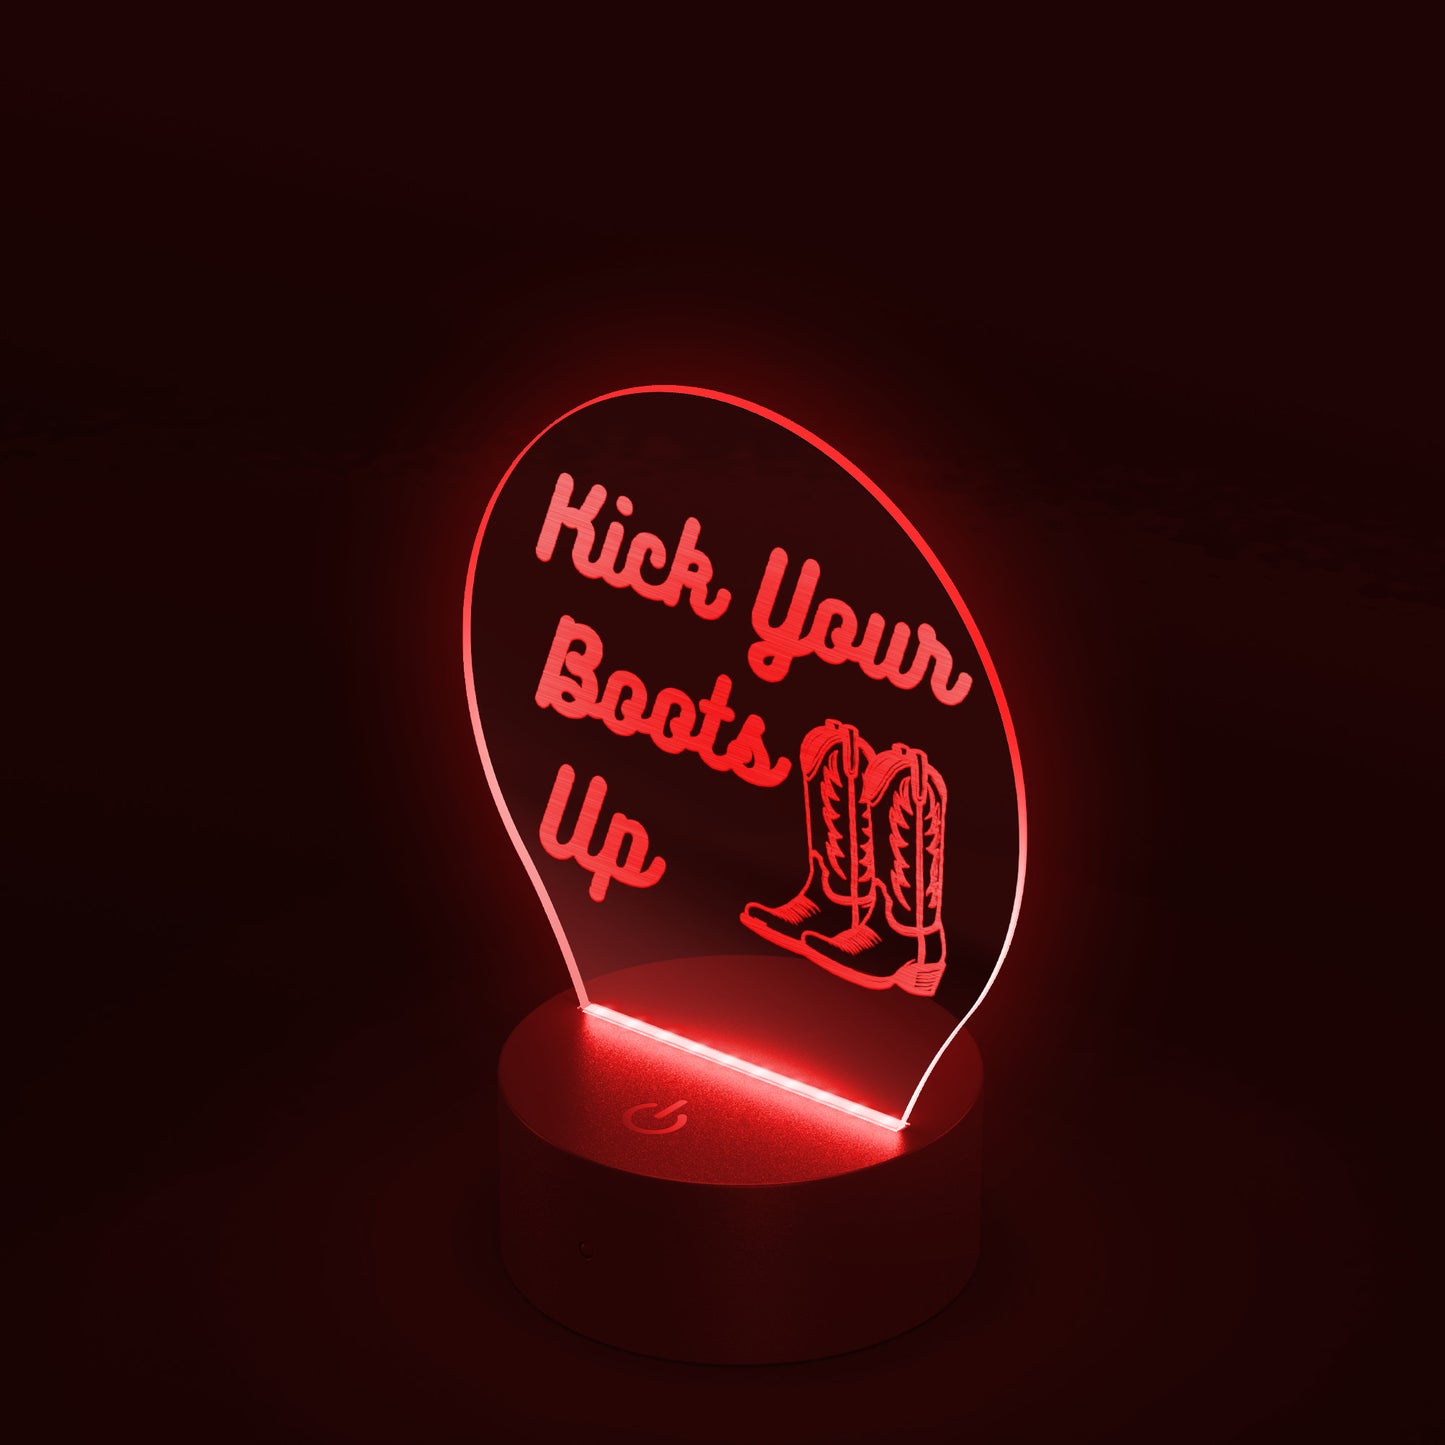 Kick Your Boots Up Cowgirl Acrylic Led Light